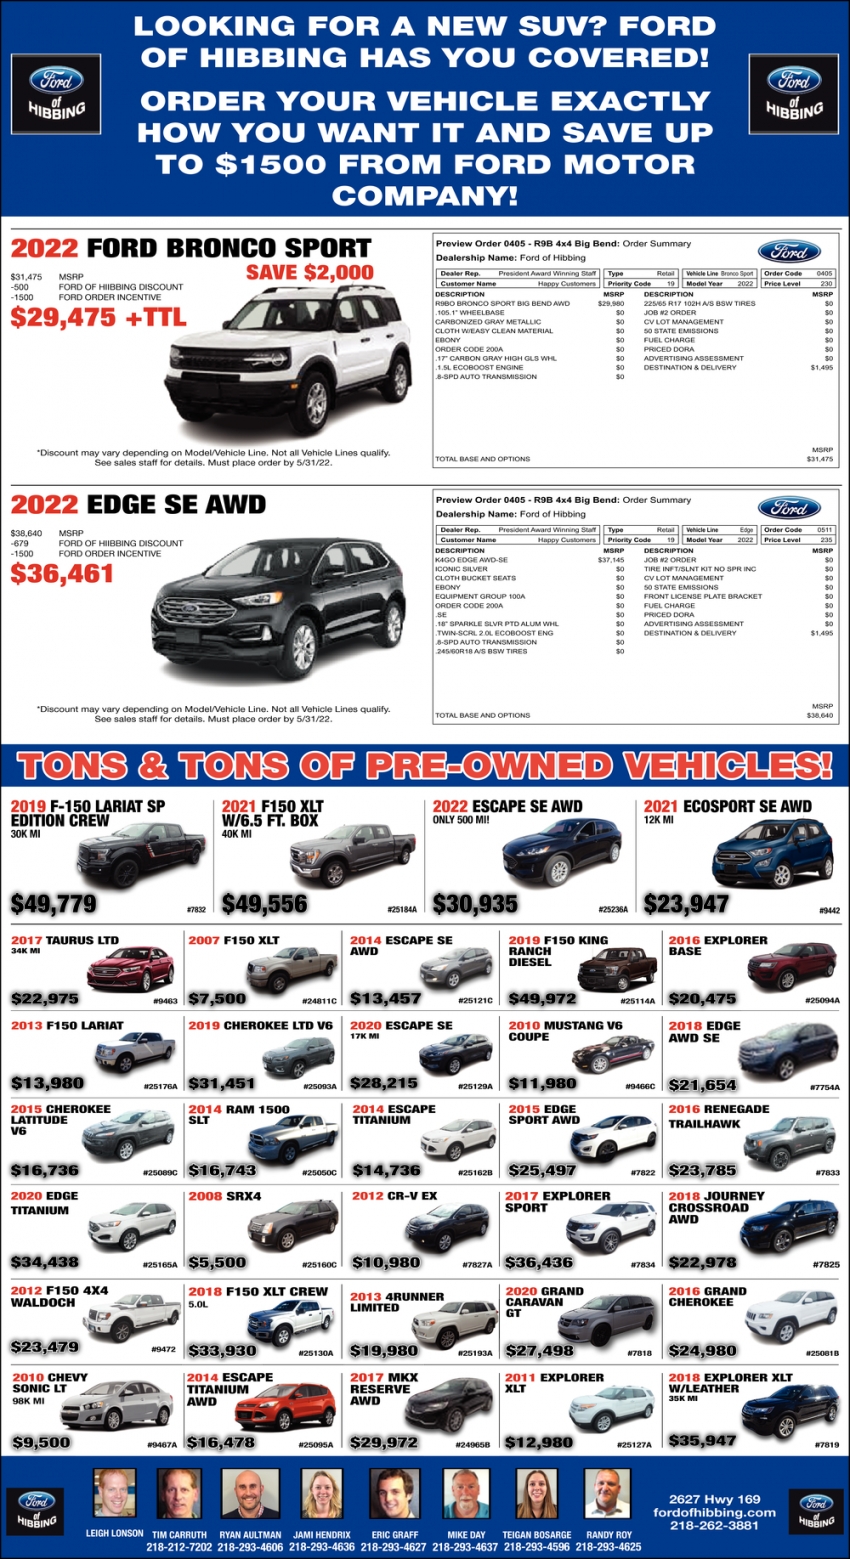 Looking For A New SUV? Ford Of Hibbing Has You Covered!